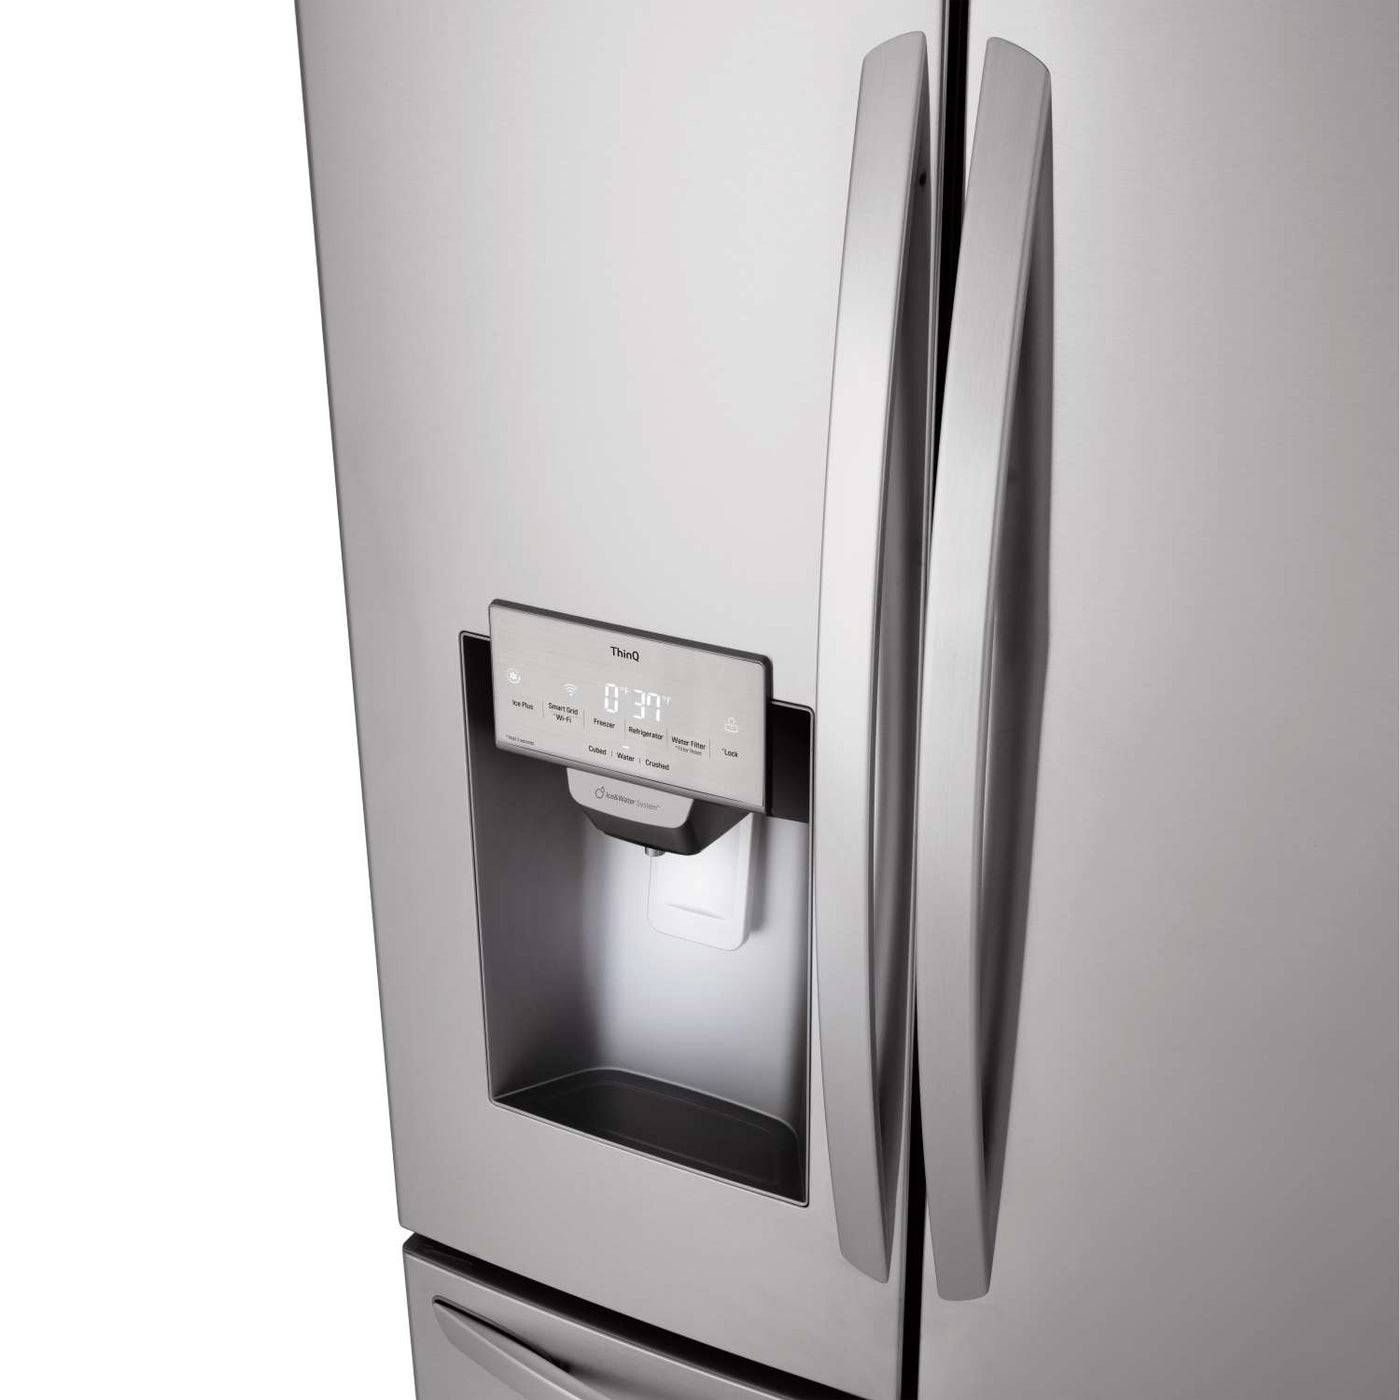 LG Smudge Resistant Stainless Steel 36" 28 Cu.ft French Door Refrigerator with Ice & Water Dispenser - LRFS28XBS